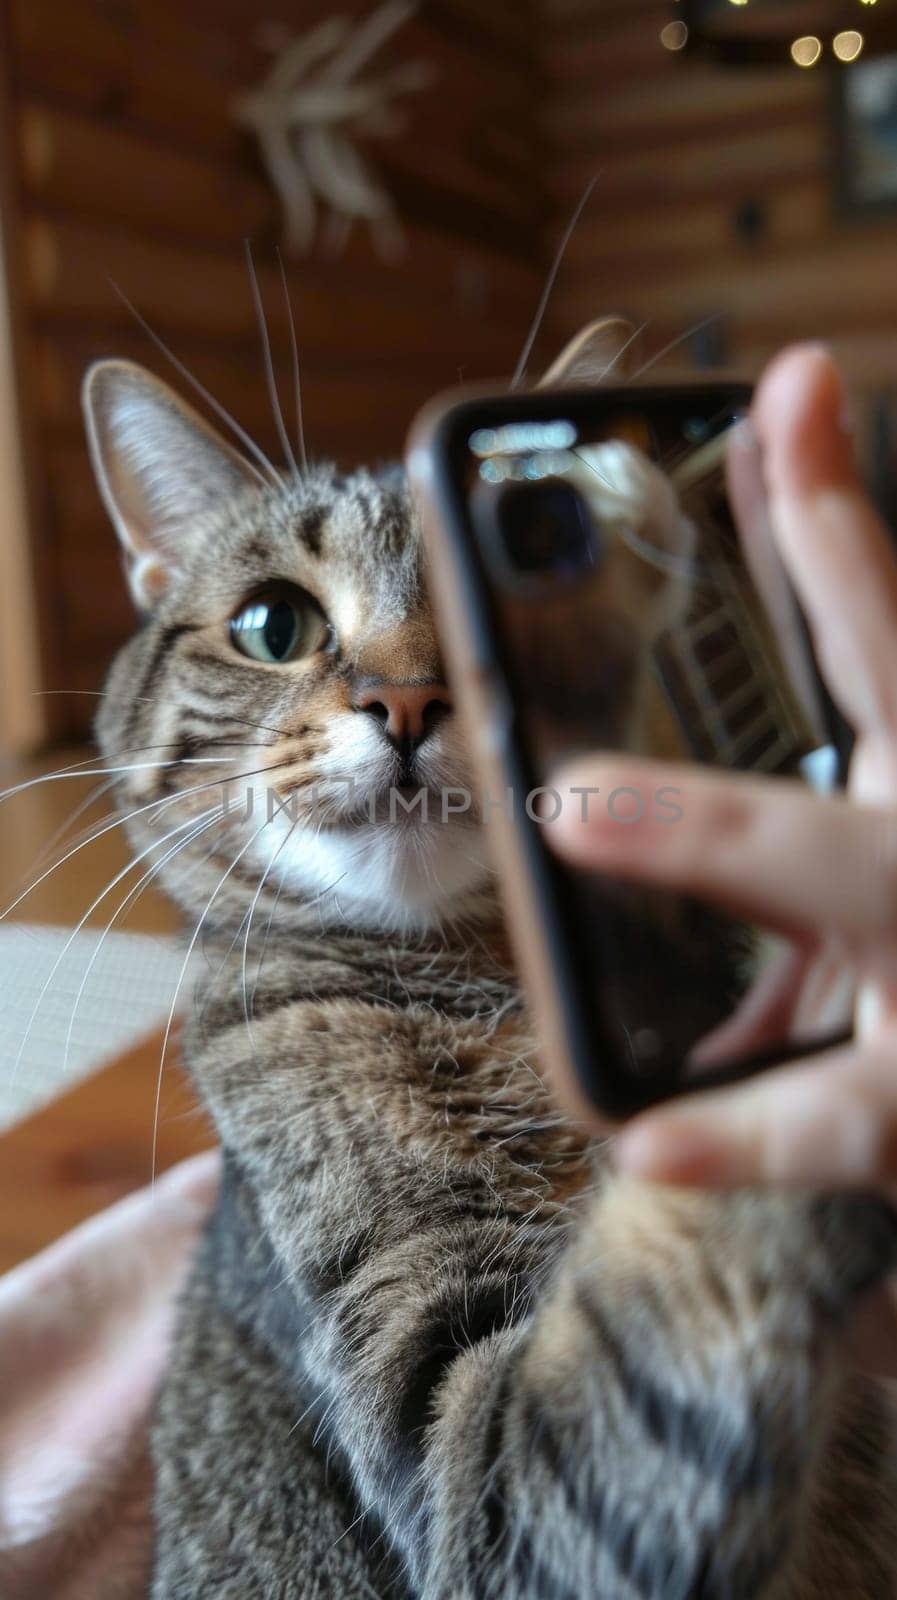 A cat holding a cell phone in its paws while being held by someone, AI by starush